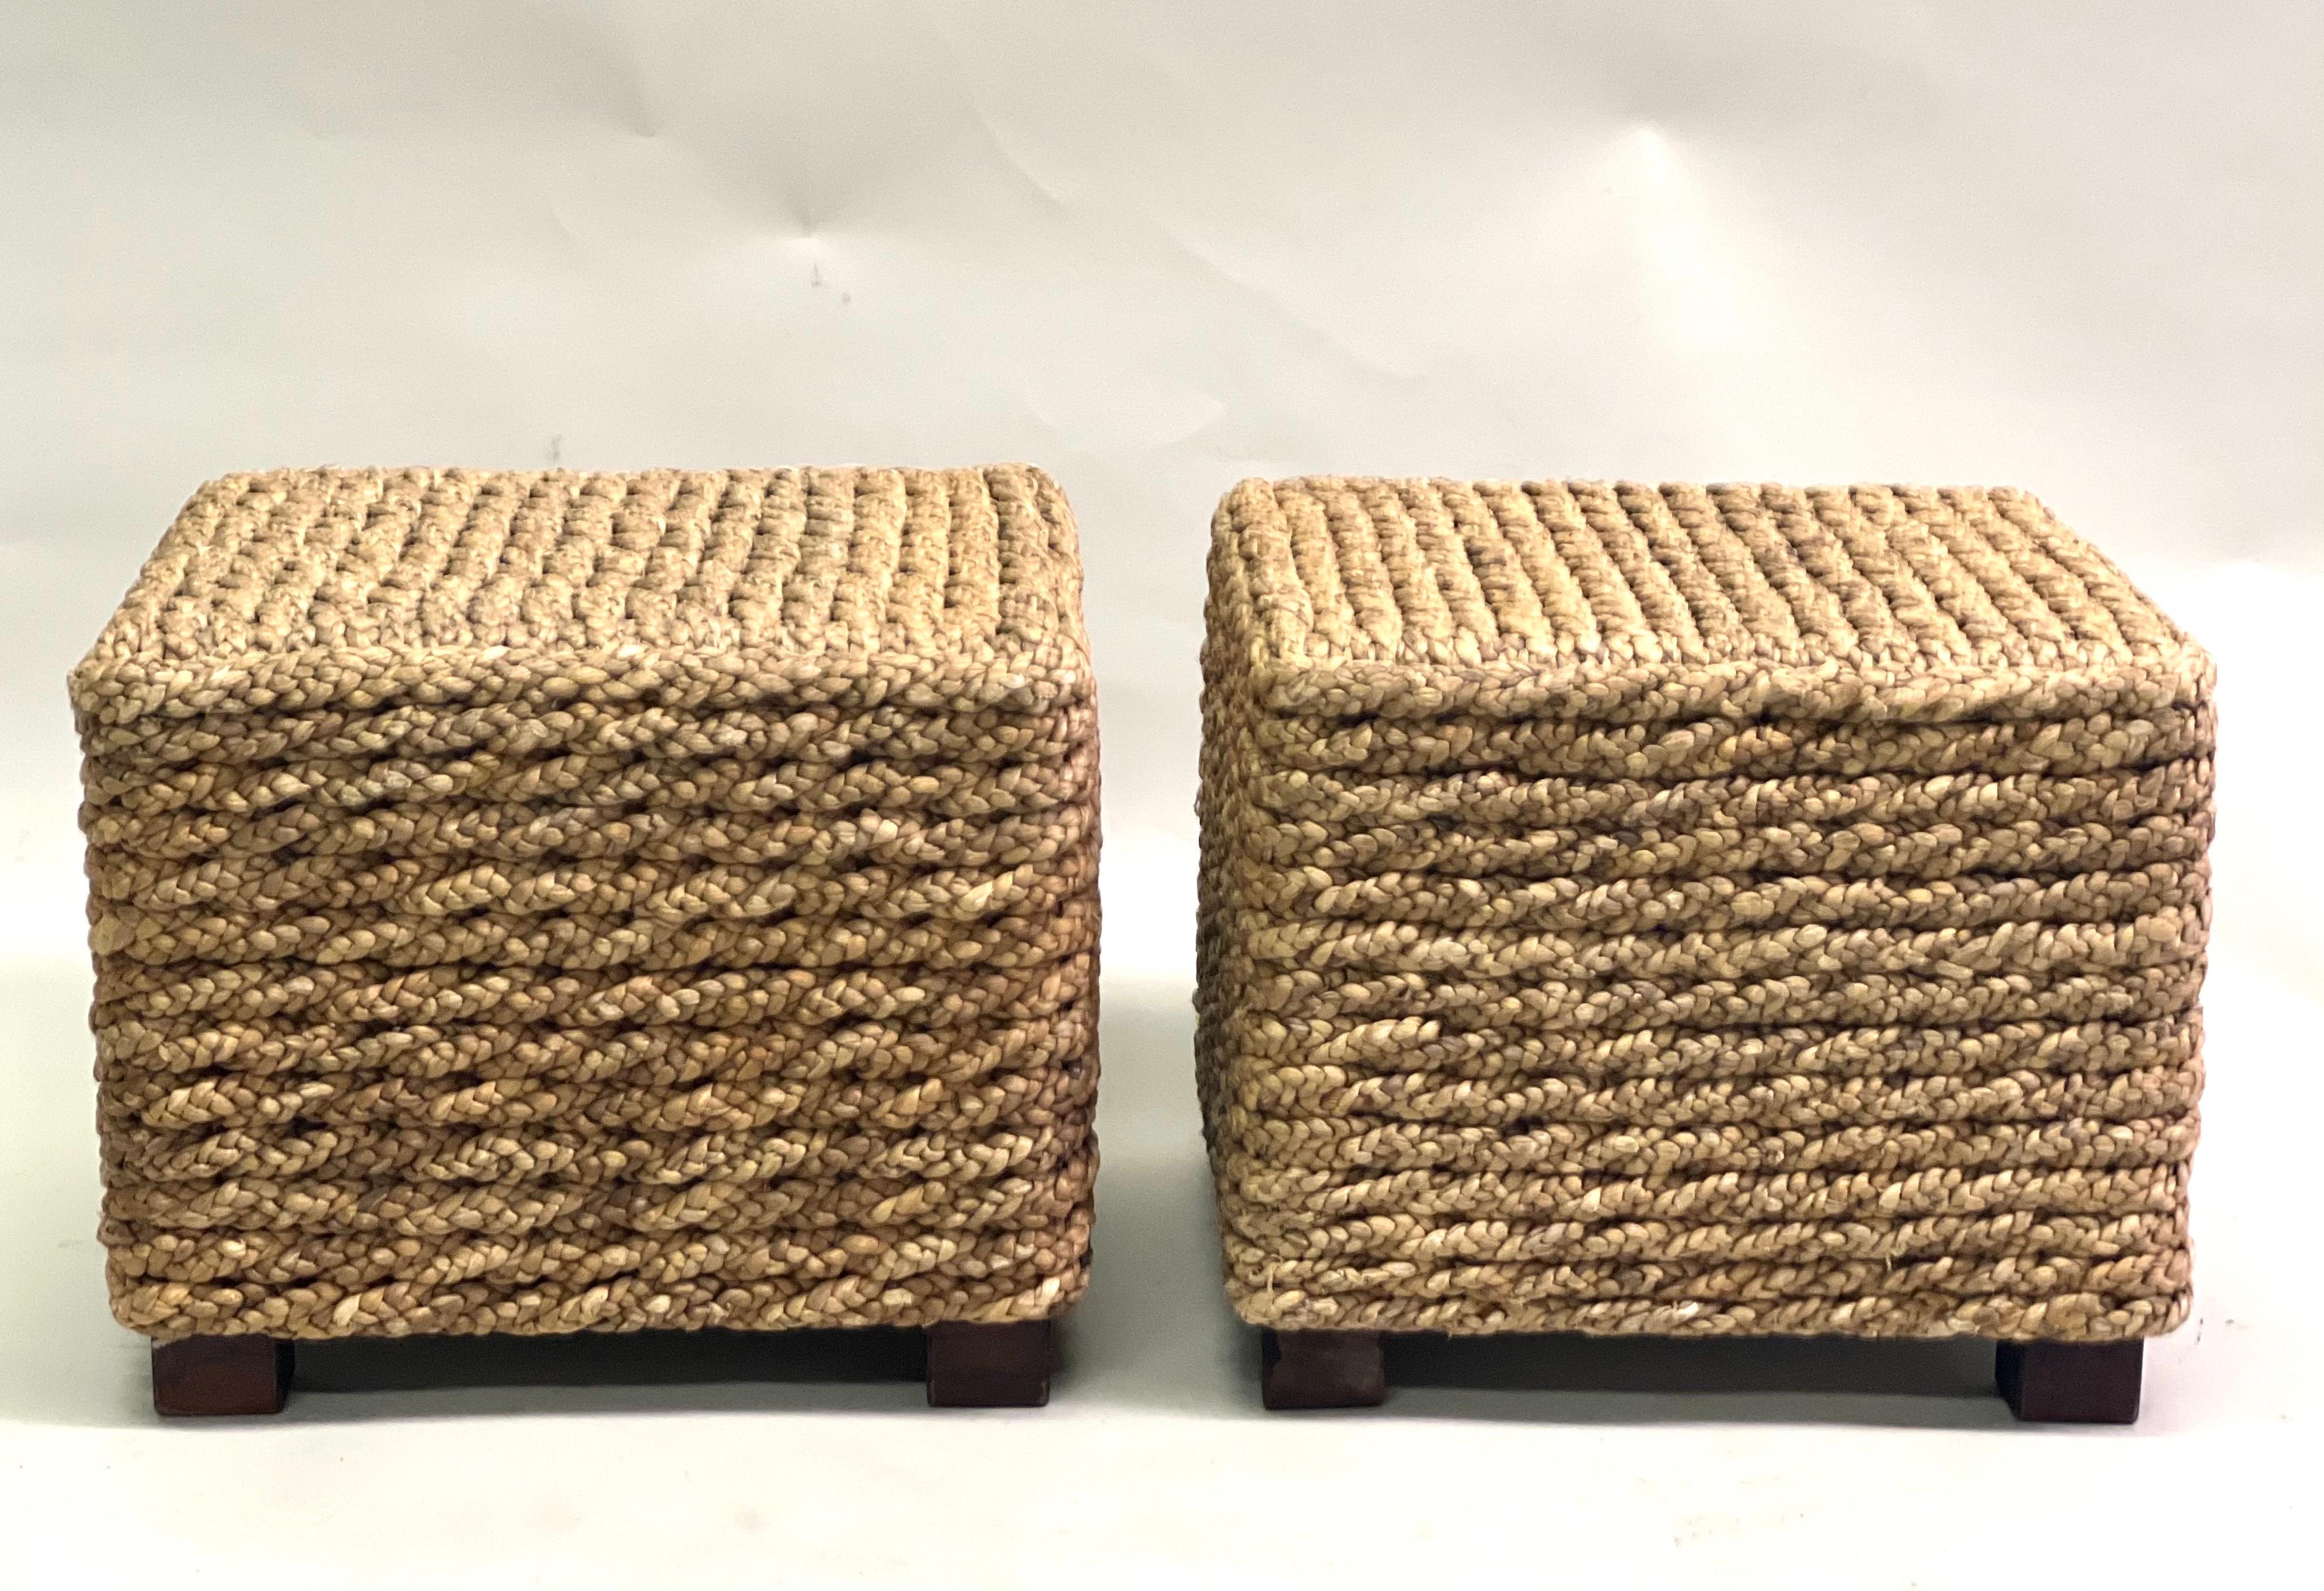 1 French Mid-Century Rope Stool / Bench by Adrien Audoux & Frida Minet For Sale 7